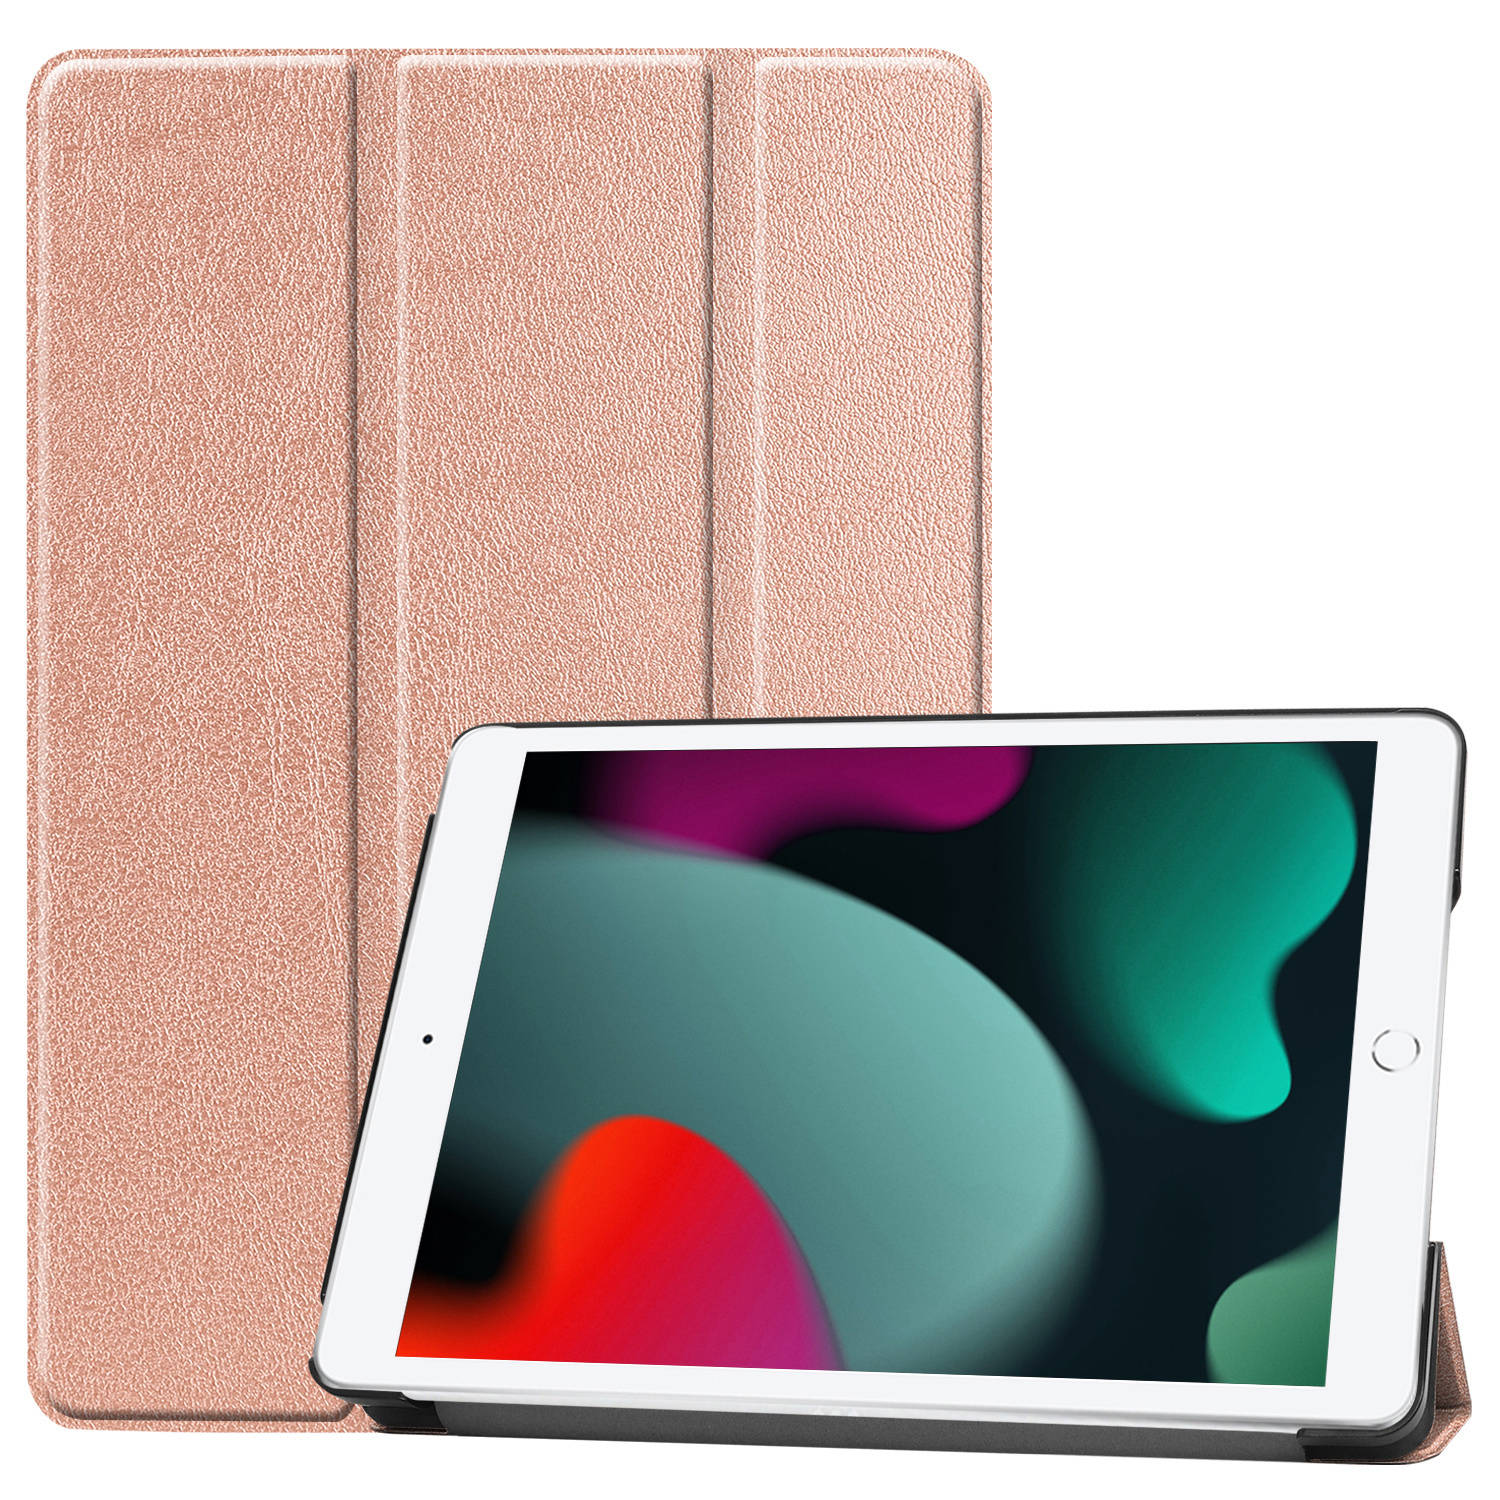 Basey Ipad 10.2 2021 Hoes Book Case Hoesje Ipad 10.2 2021 Hoesje Hard Cover Case Hoes Rose Goud